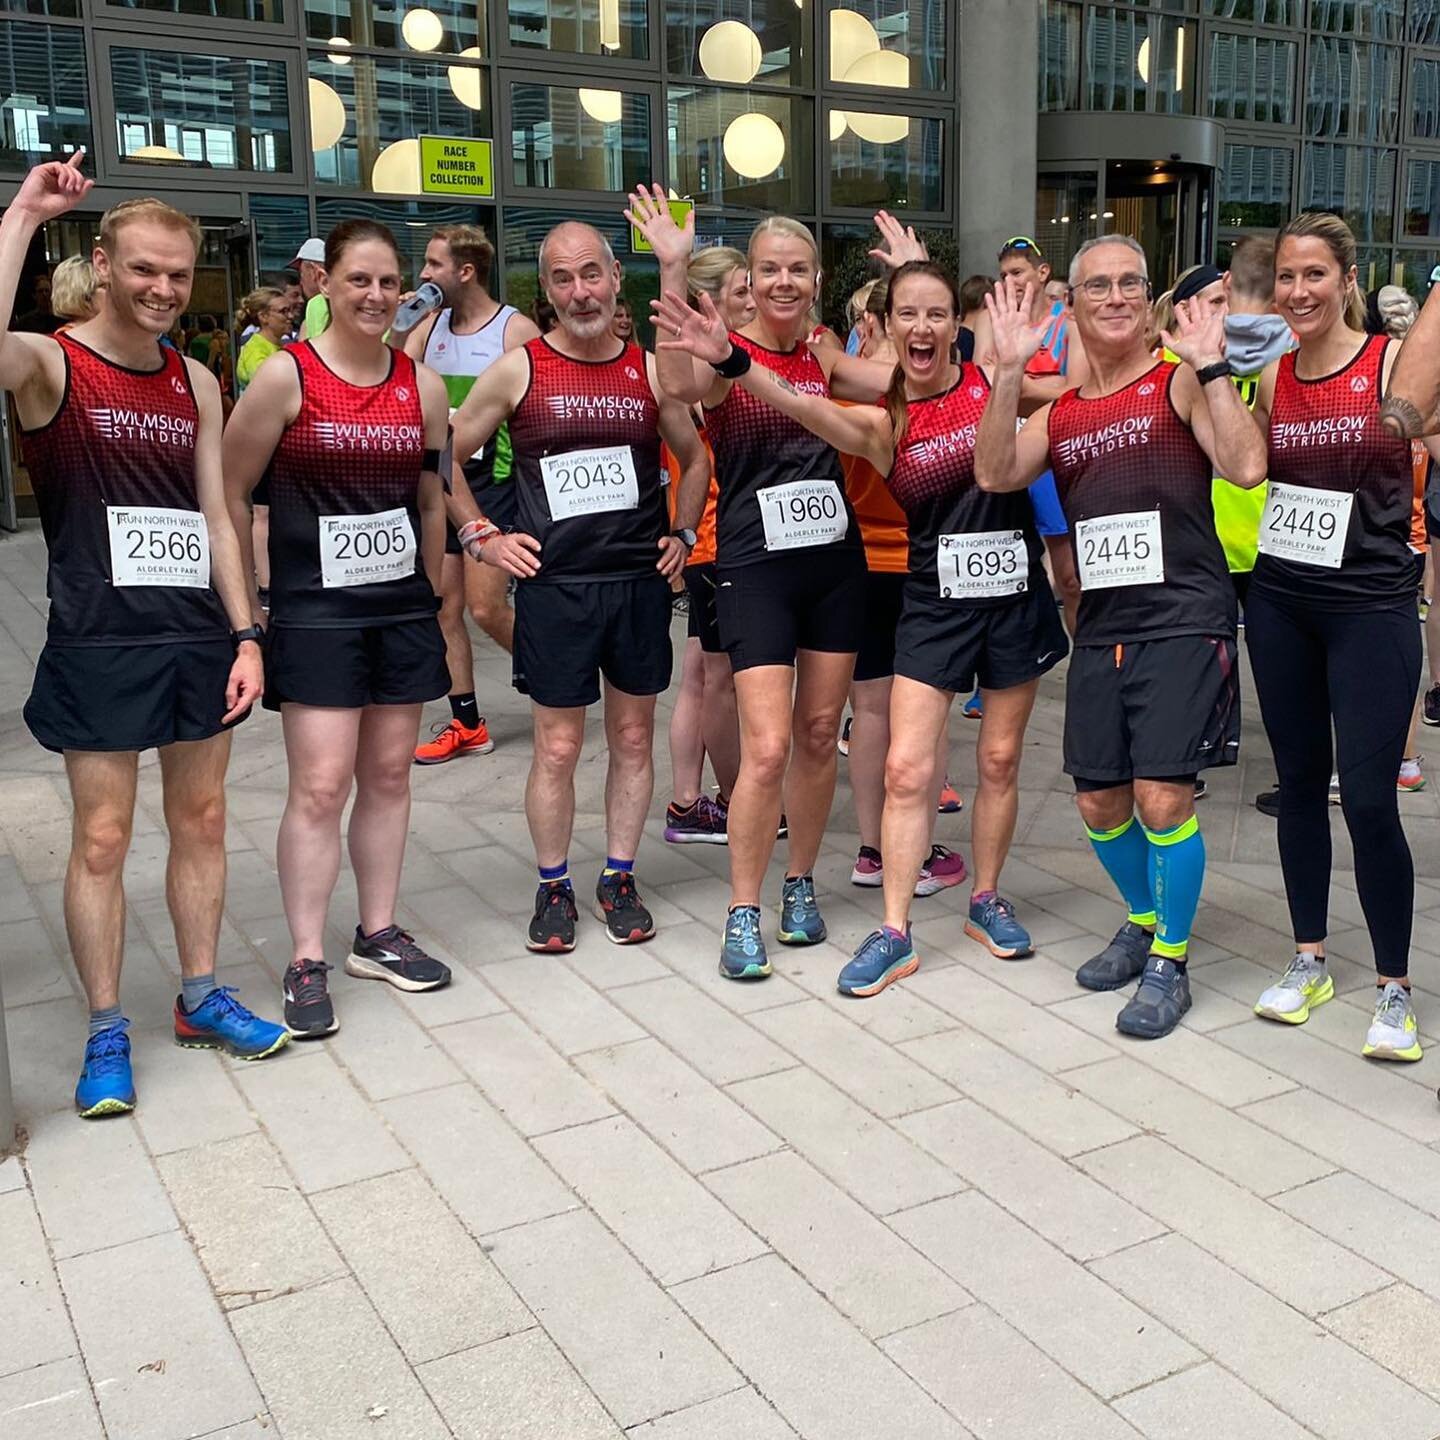 A fantastic evening at the Alderley Park Summer Trail Race. Well done to all of our members who raced, and a special mention to Amanda who came third in her age category - an amazing result!
 👏👏👏 
Thank you as always to the team @run_north_west an